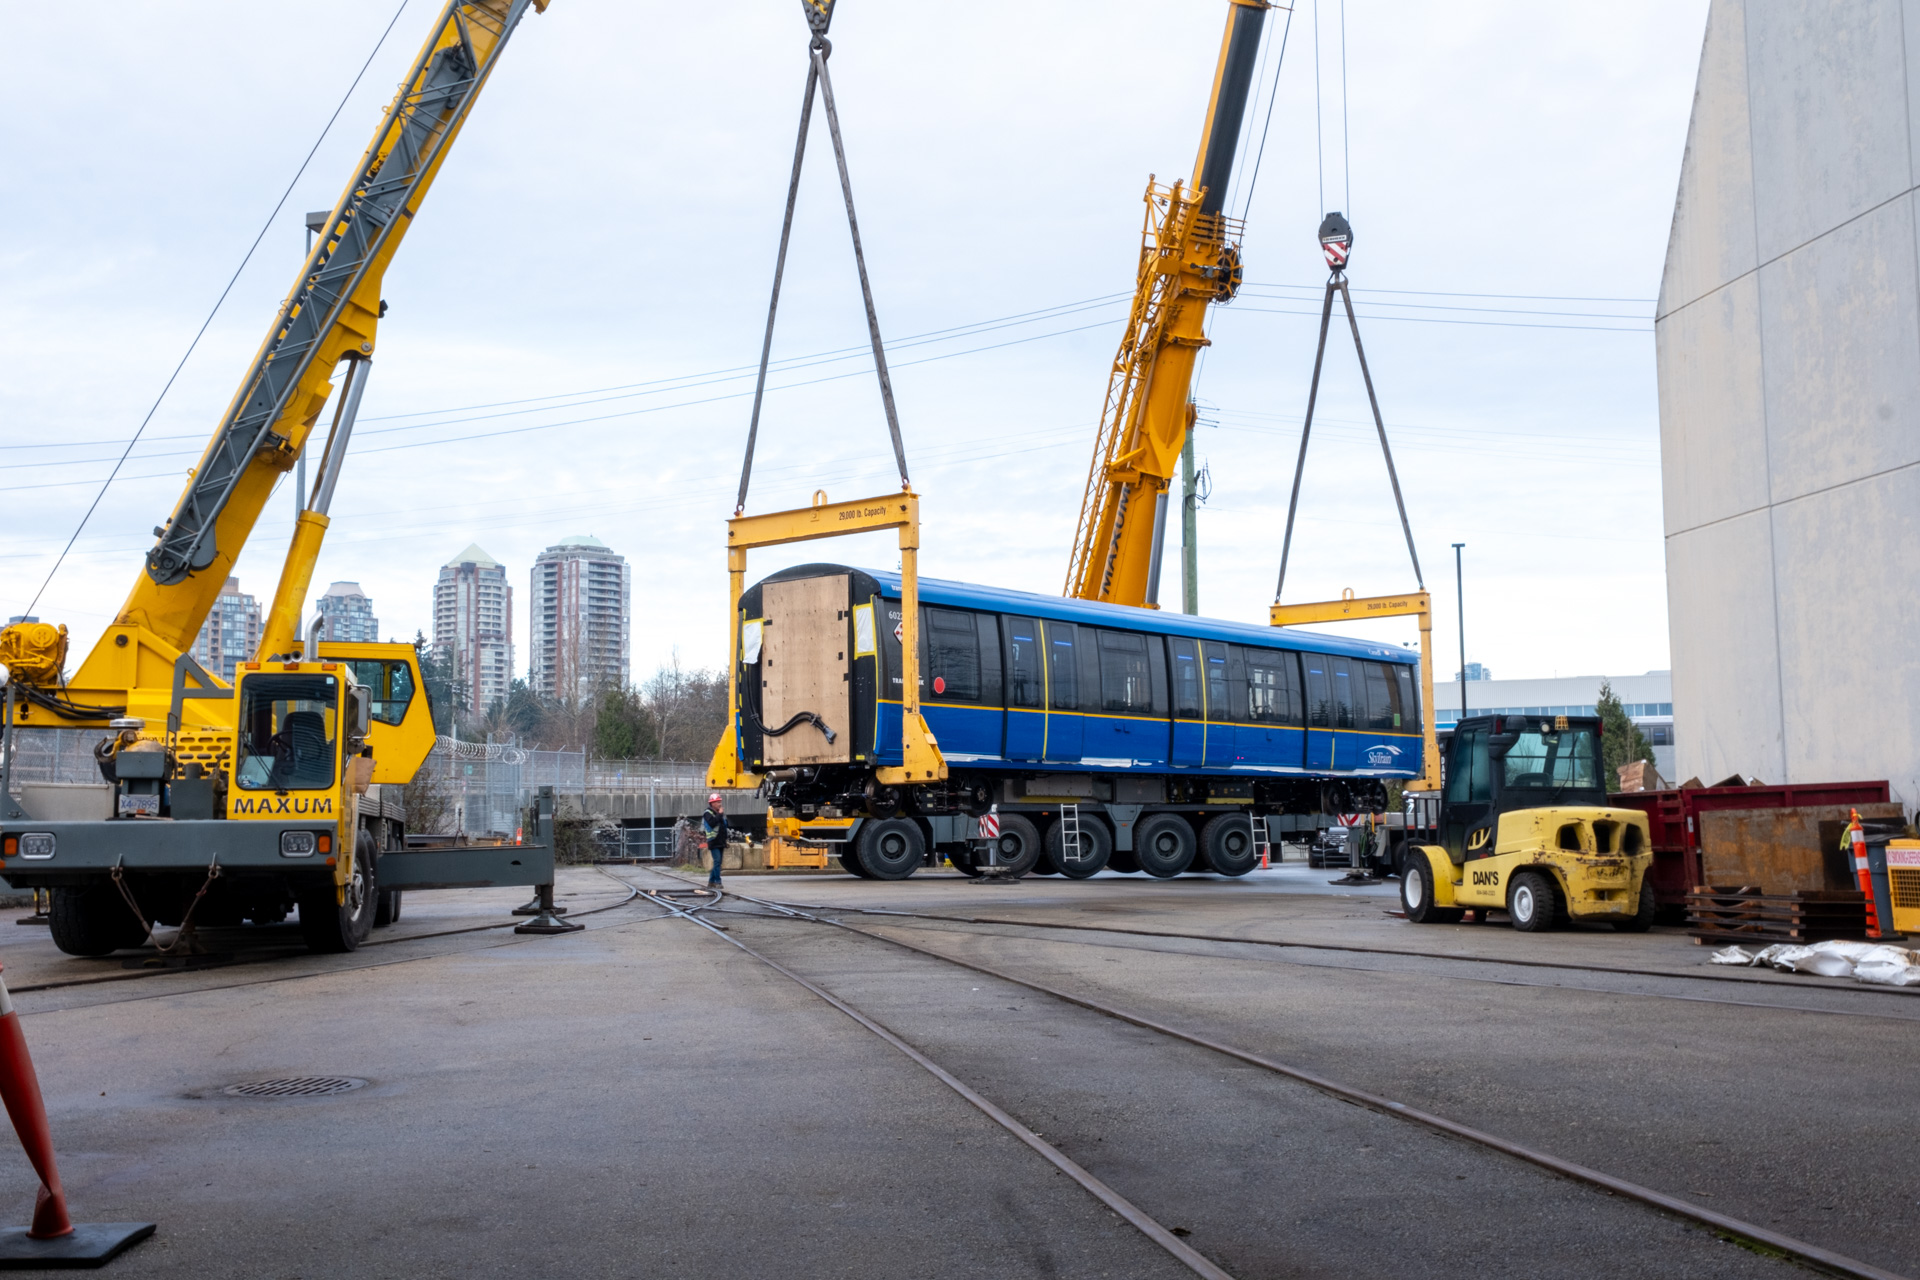 The Mark V SkyTrain unloaded by two cranes